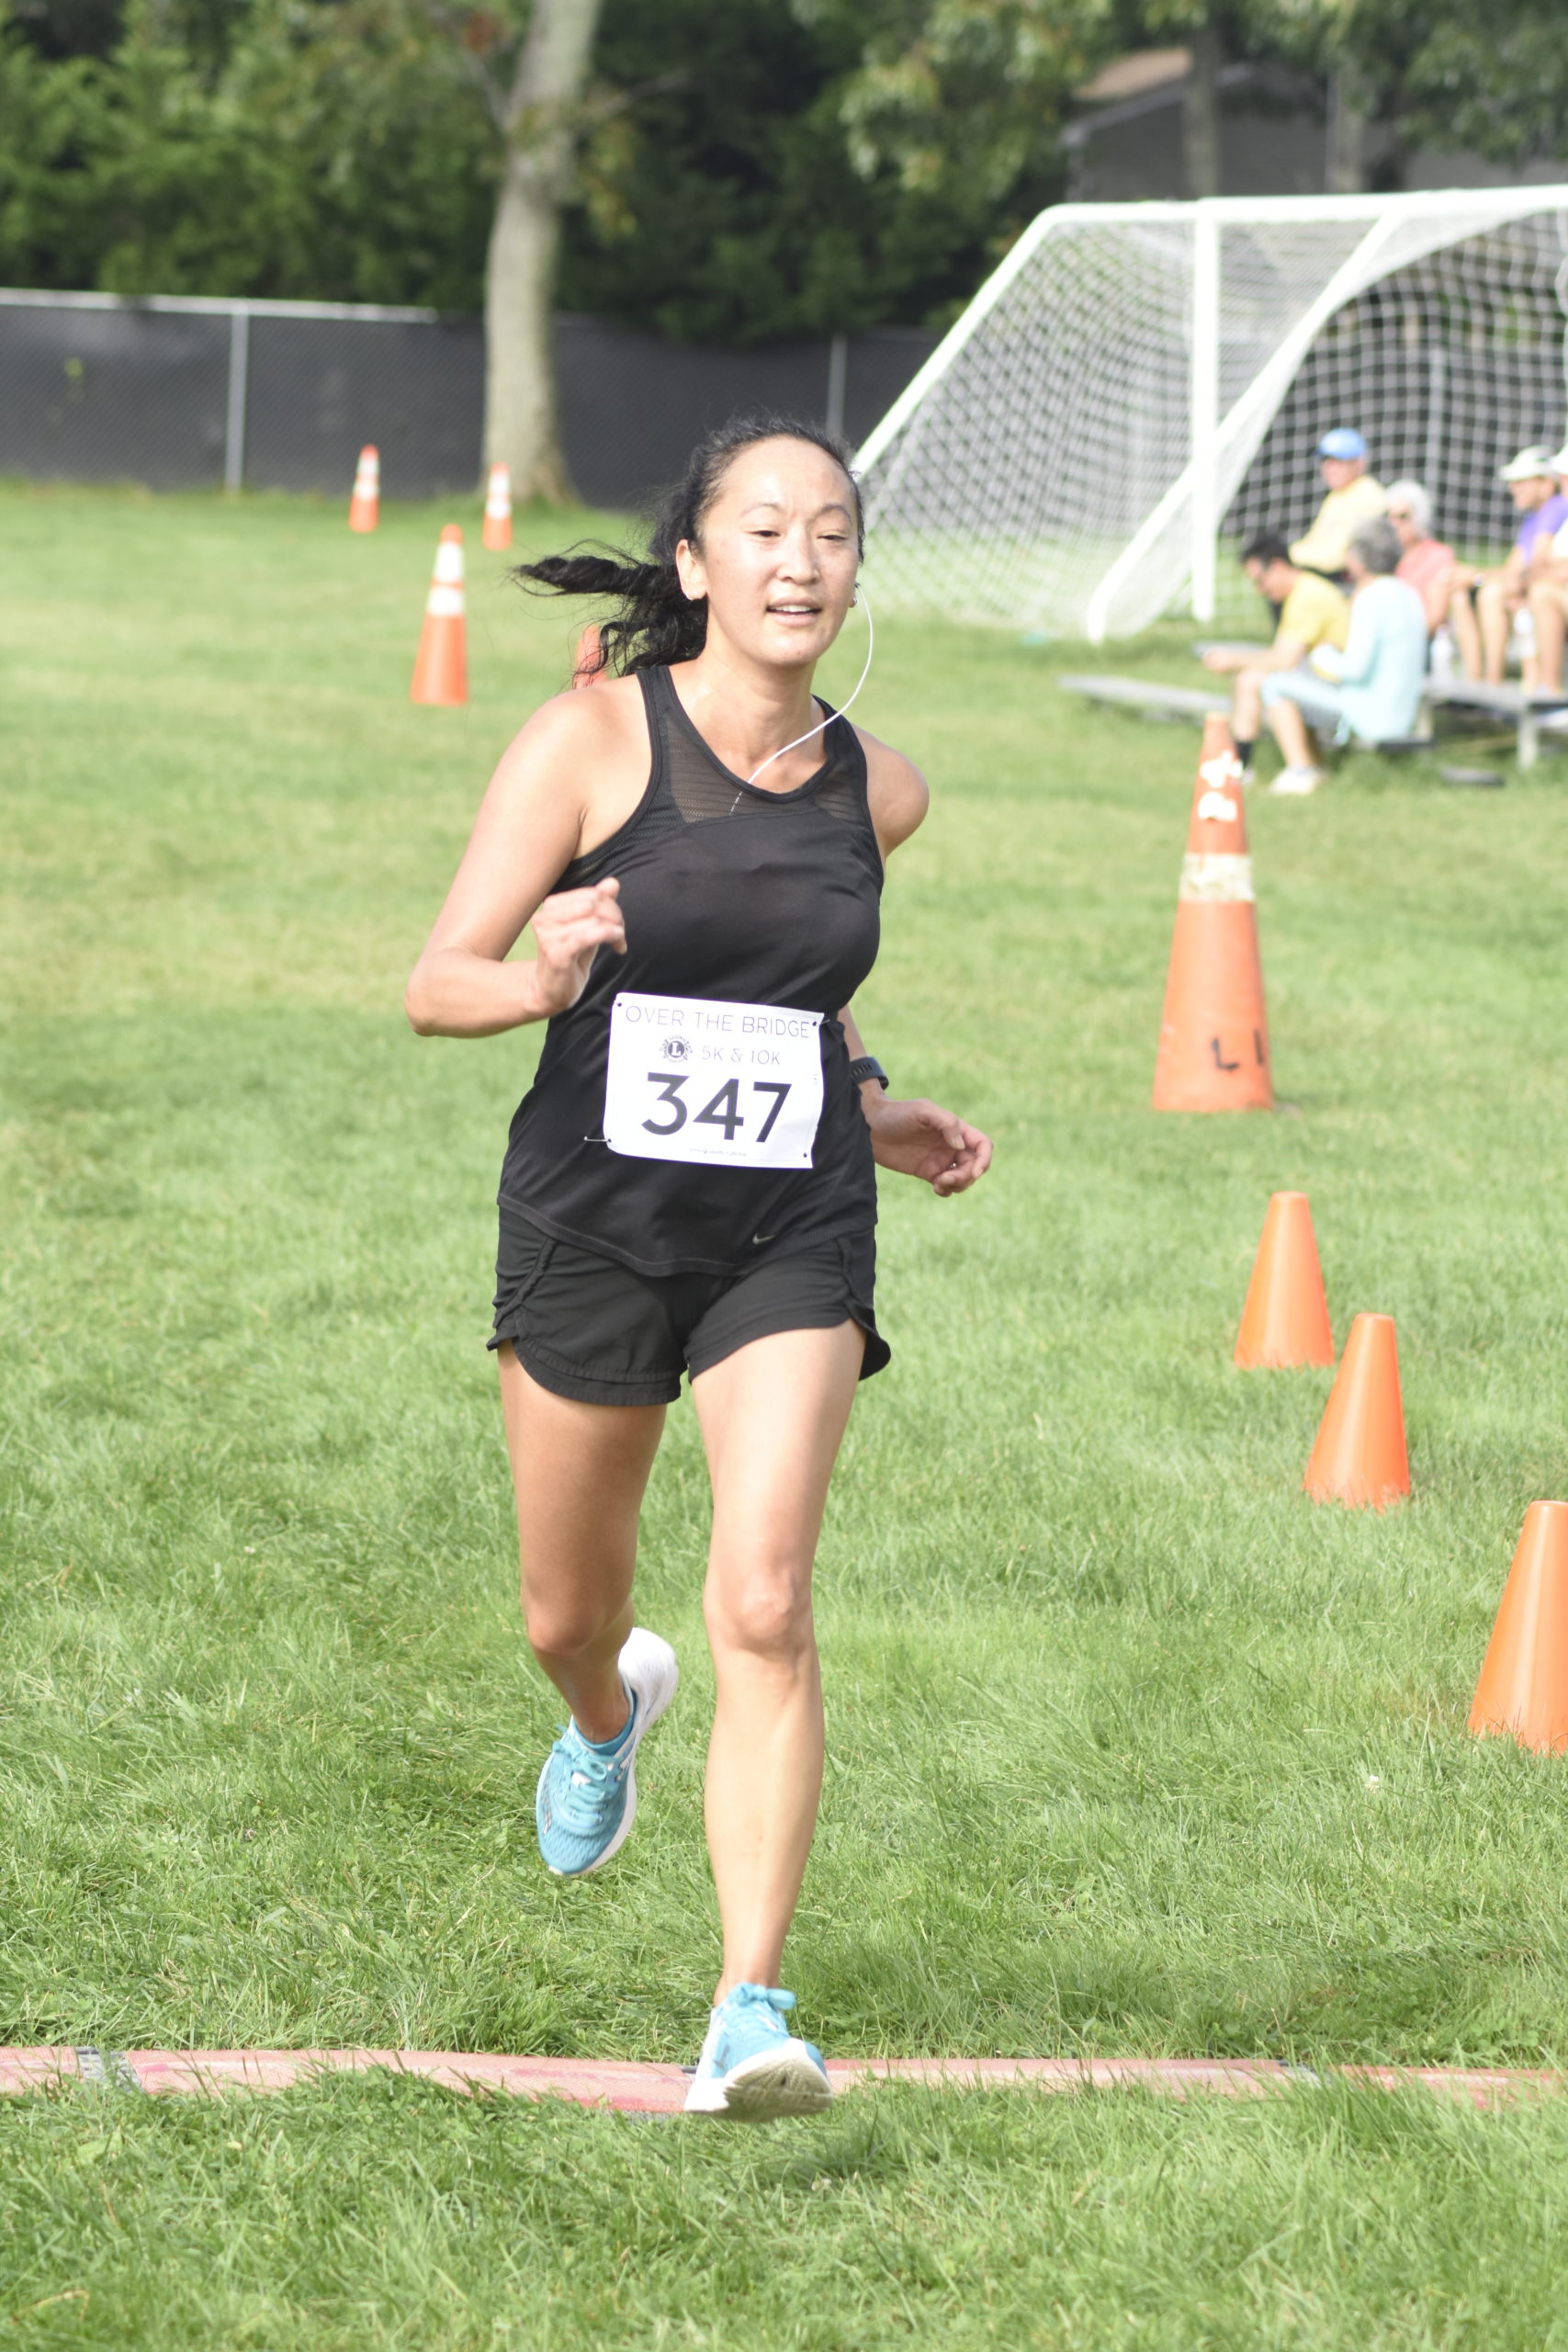 Angela Kim of Manorville placed third among women in the 10K.